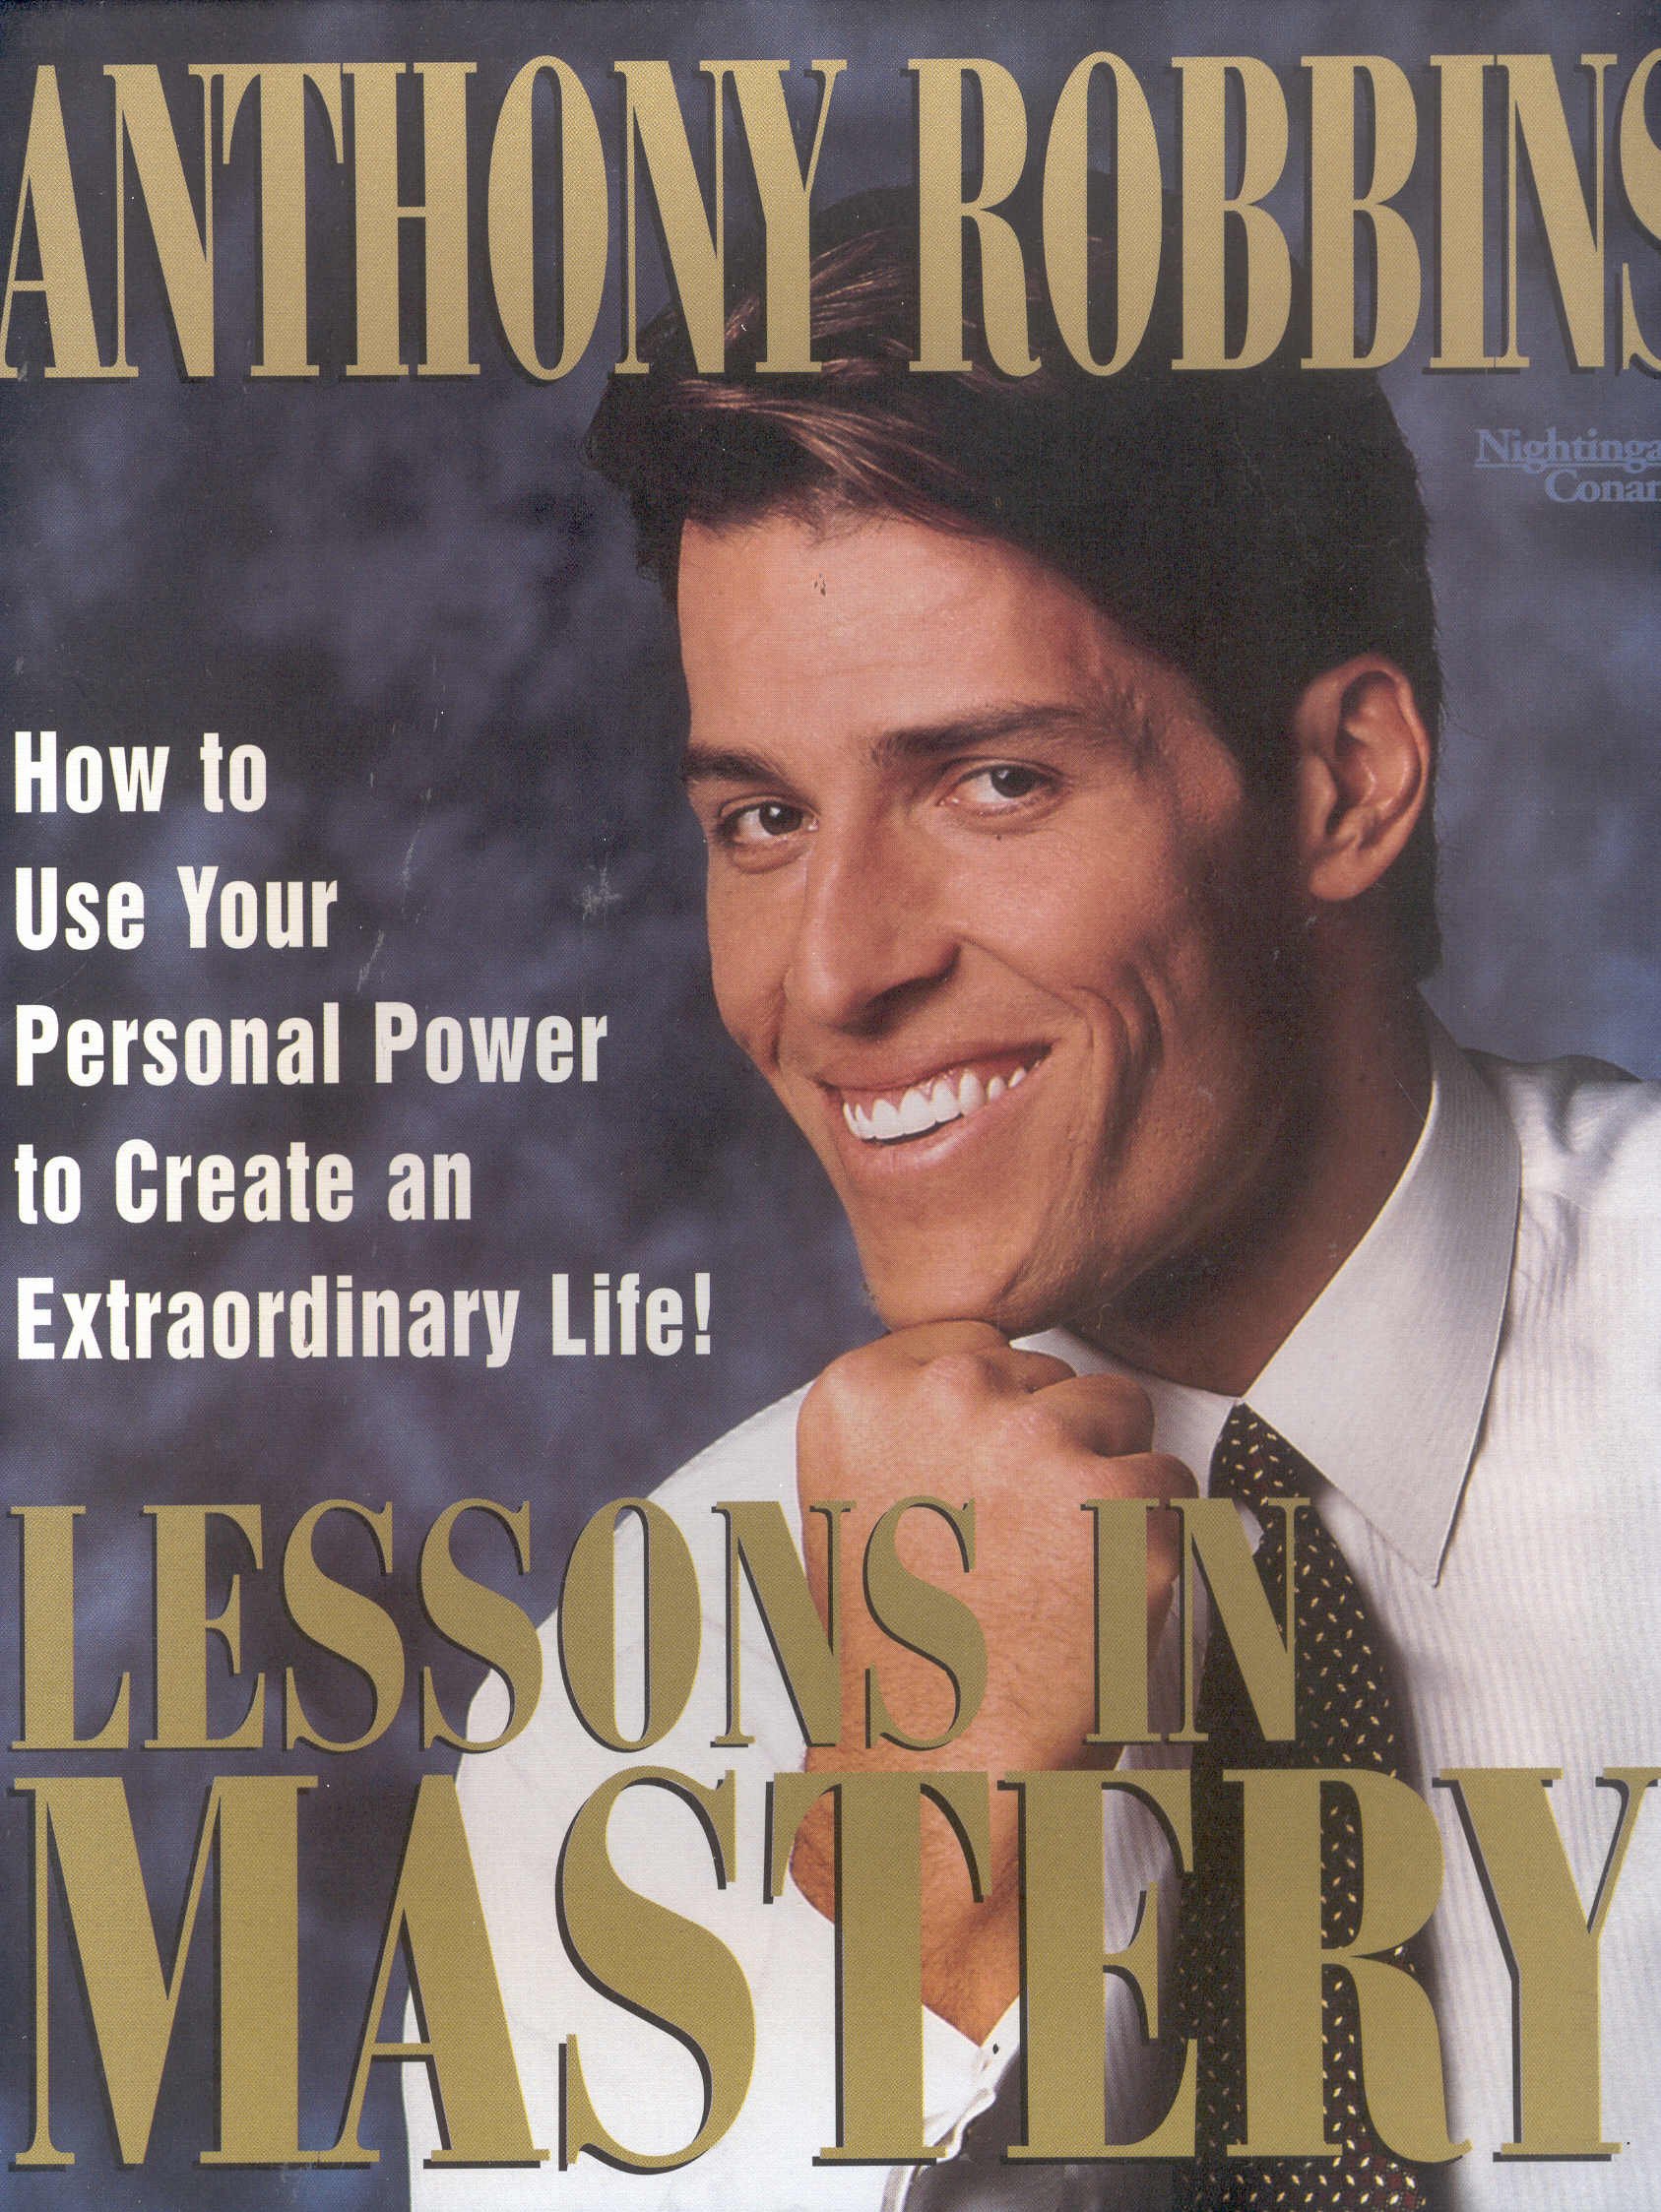 Lessons in Mastery: How to Use Your Personal Power to Create an Extraordinary Life! Tony Robbins